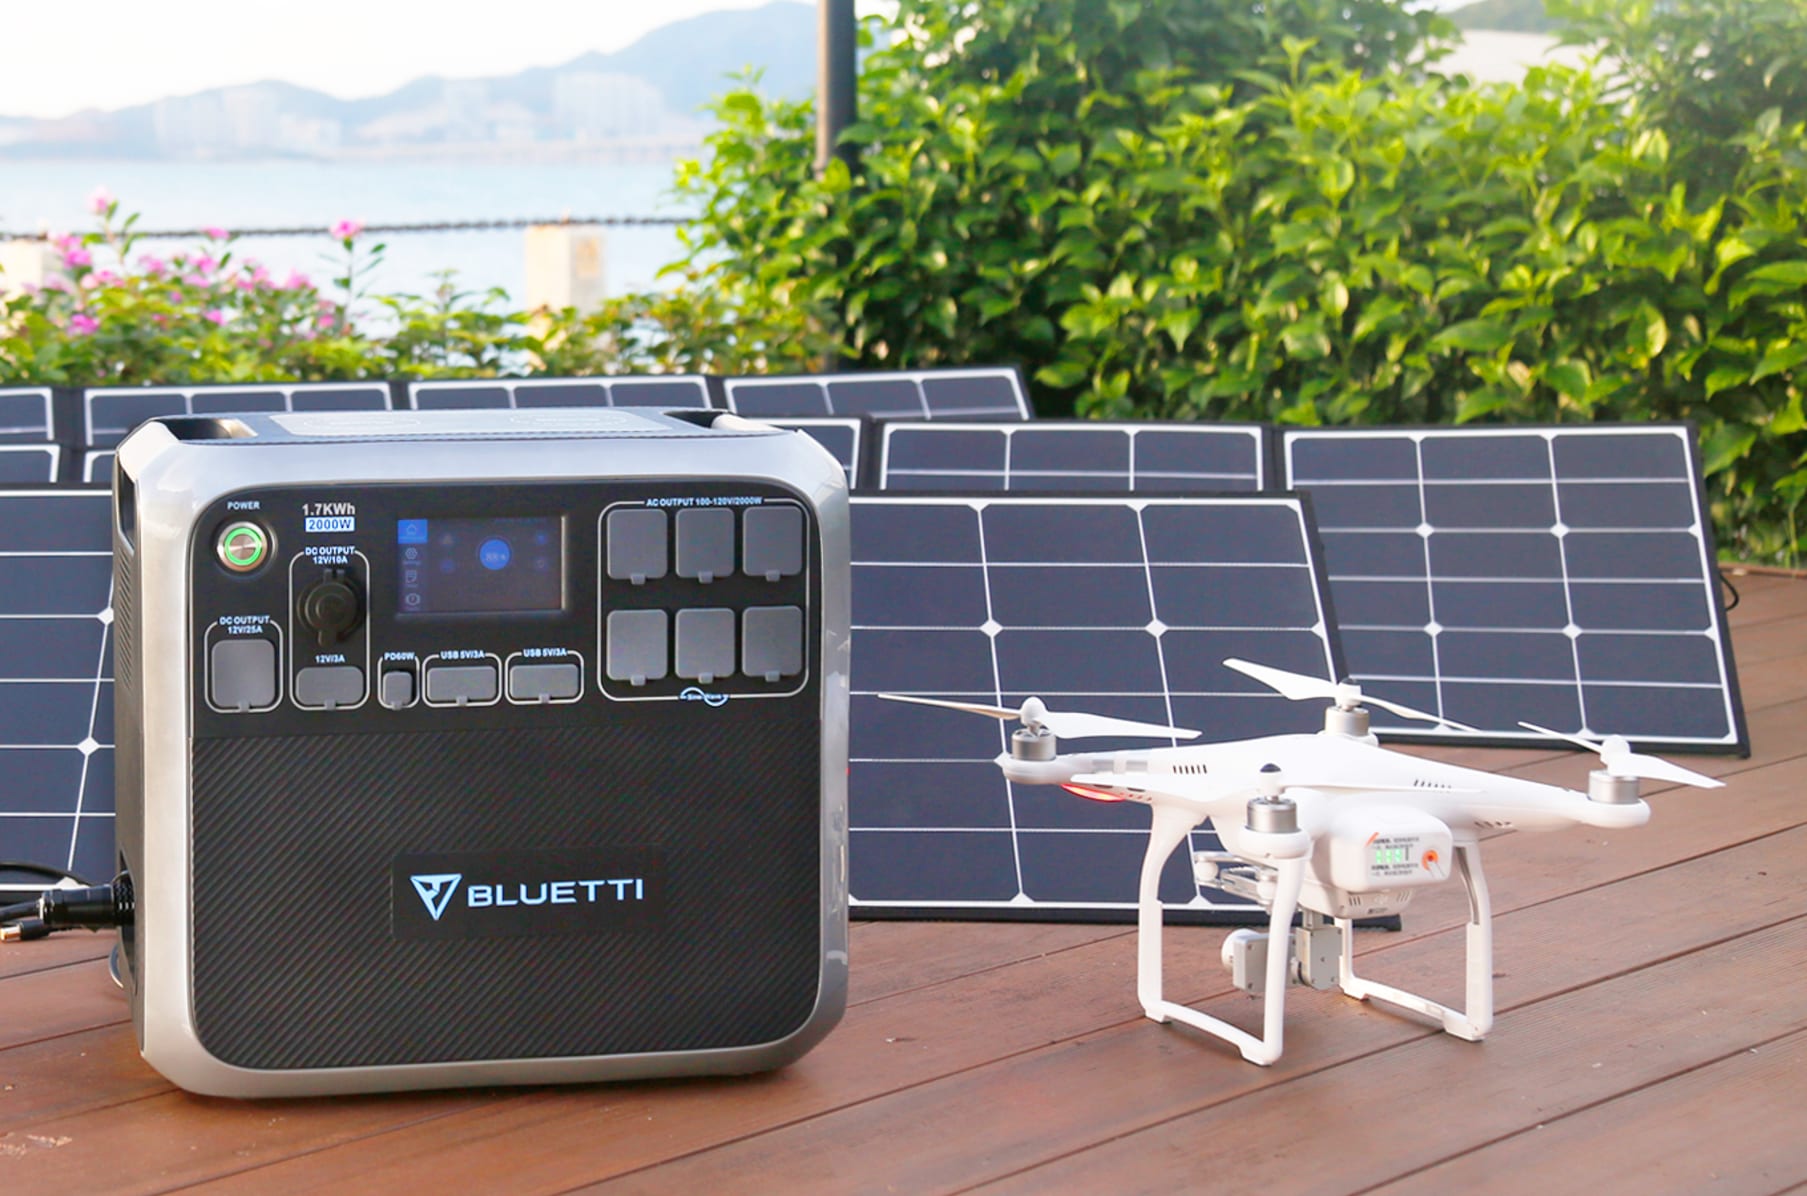 Buy BLUETTI 800W/716Wh Portable Power Station EB70S Solar Generator LiFePo4 Battery Pack with 4 110V AC Outlets (Solar Panel Optional) Camping Supplies for Outdoor Adventure Power Outage Home Off-Grid Online in Ghana.